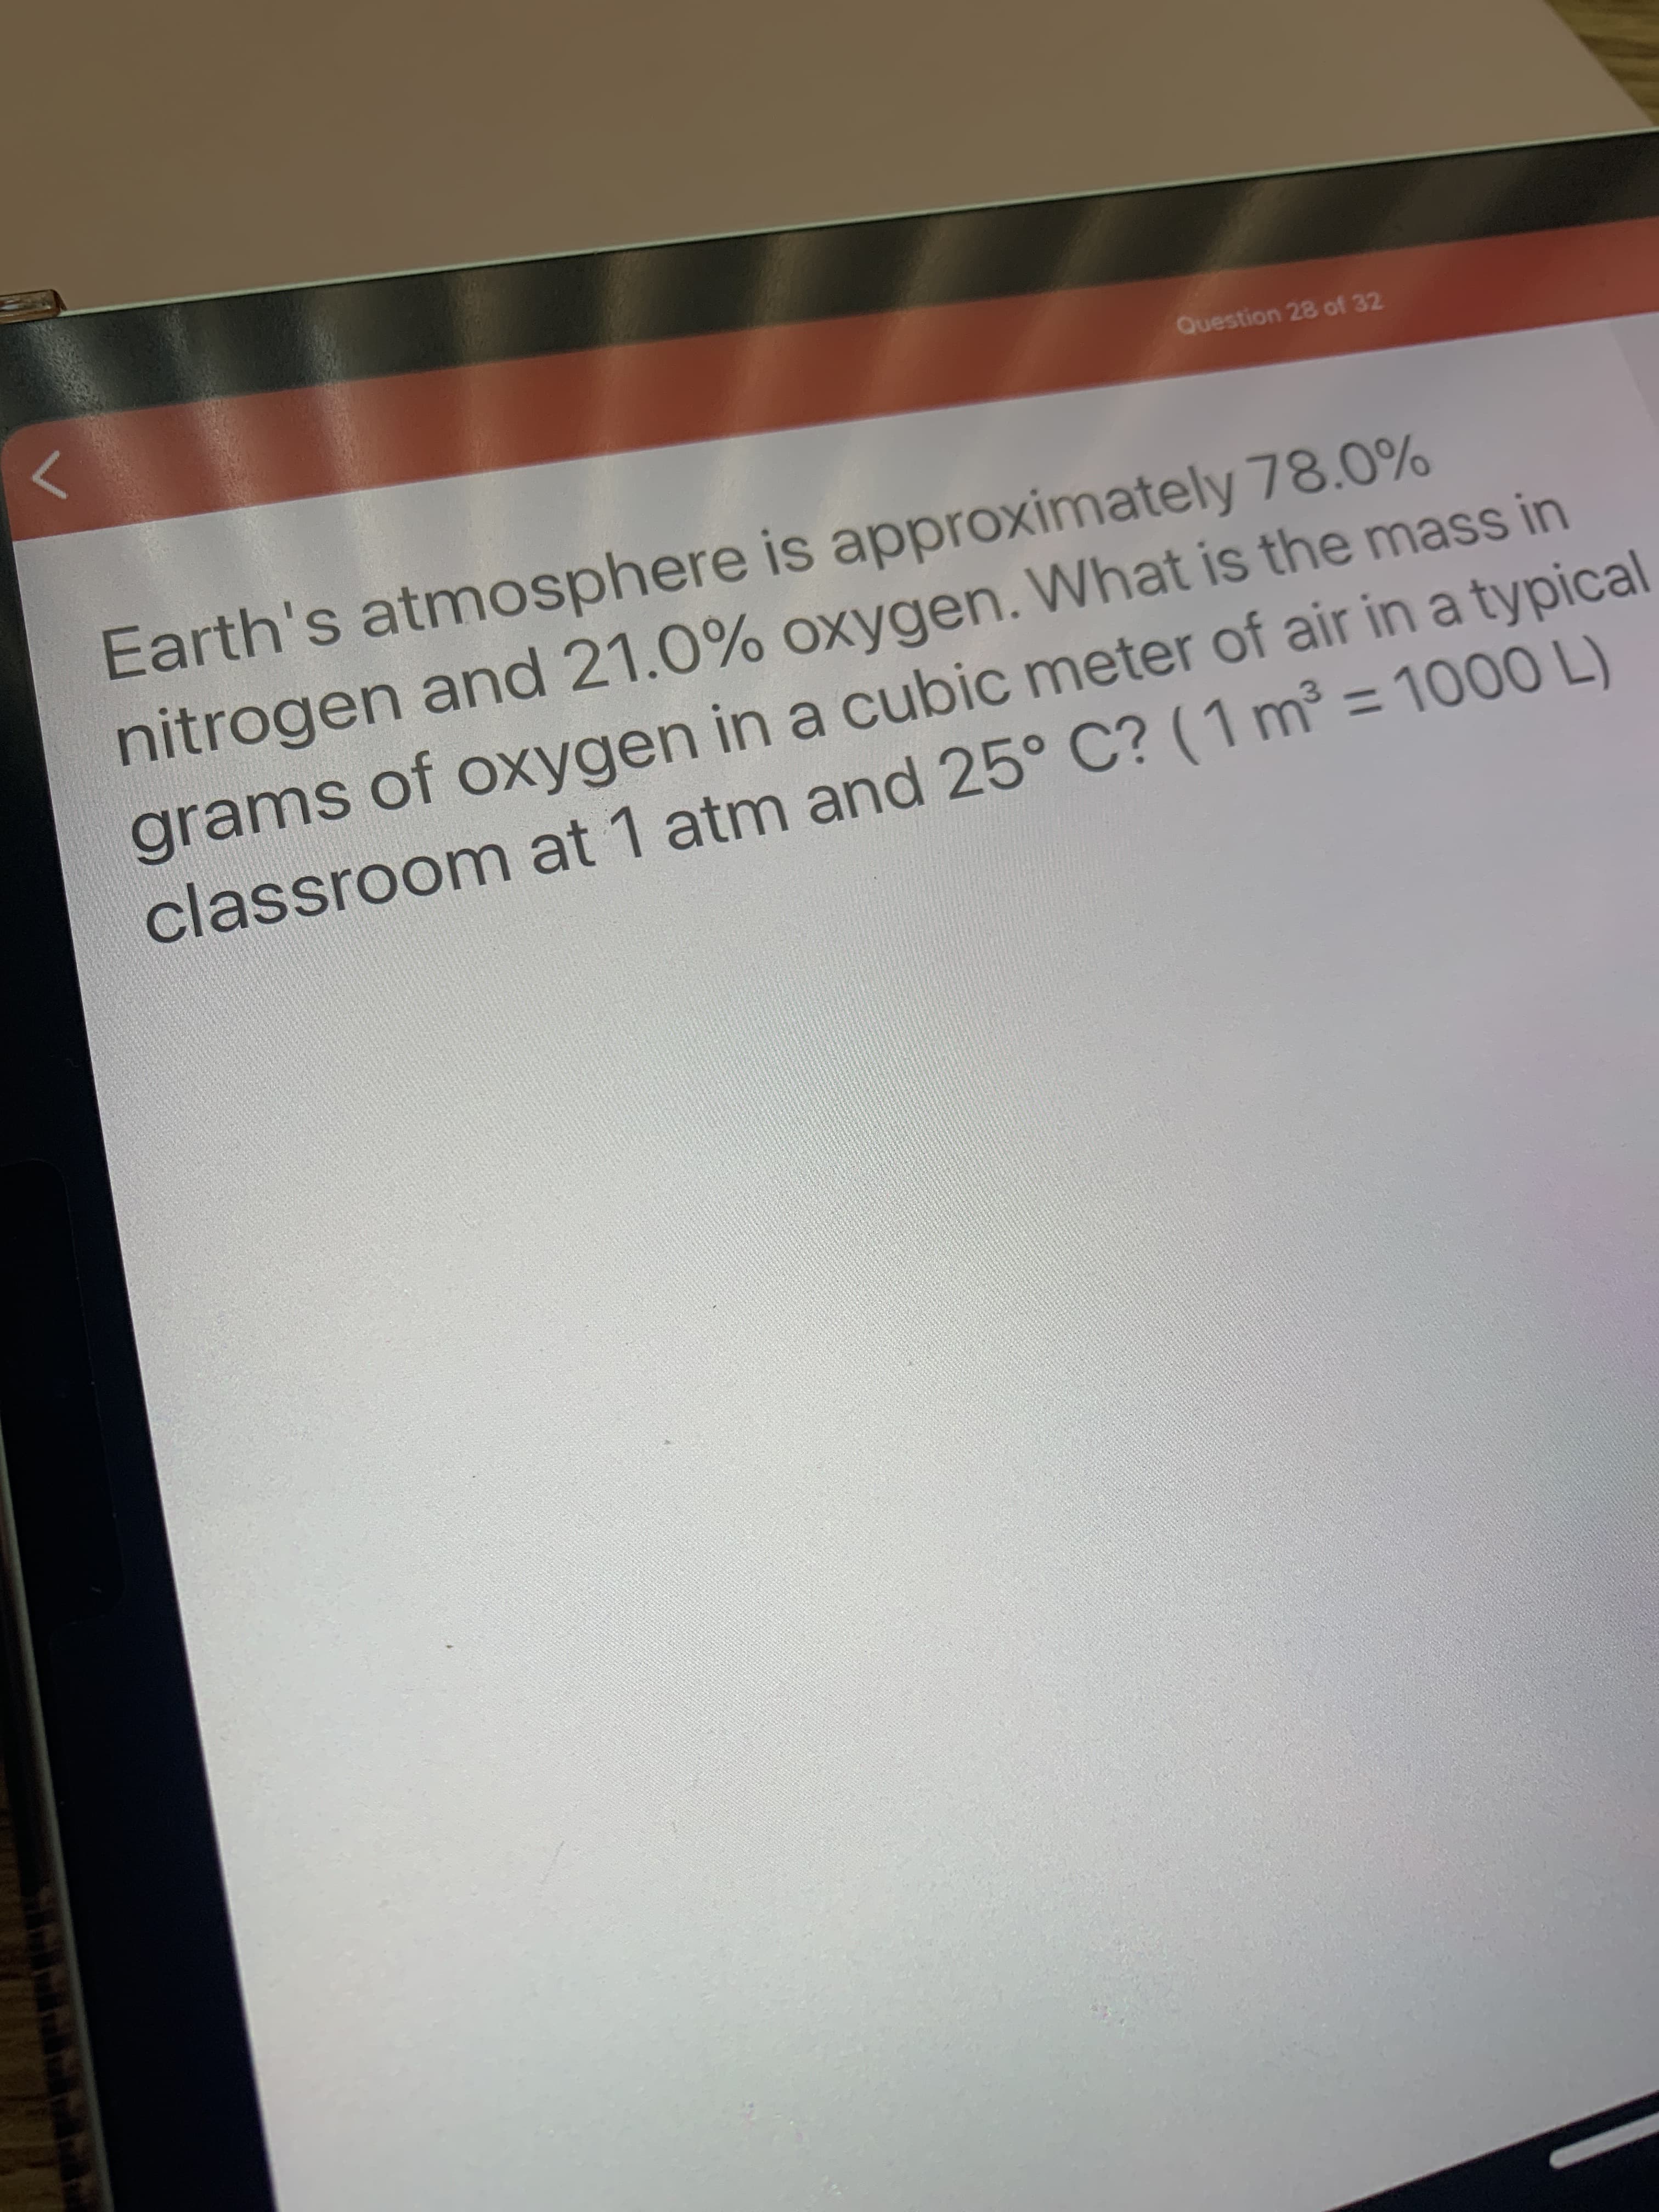 Earth's atmosphere is approximately 78.0%
nitrogen and 21.0% oxygen. What is the mass in
grams of oxygen in a cubic meter of air in a typical
classroom at 1 atm and 25° C? (1 m³ = 1000 L)
